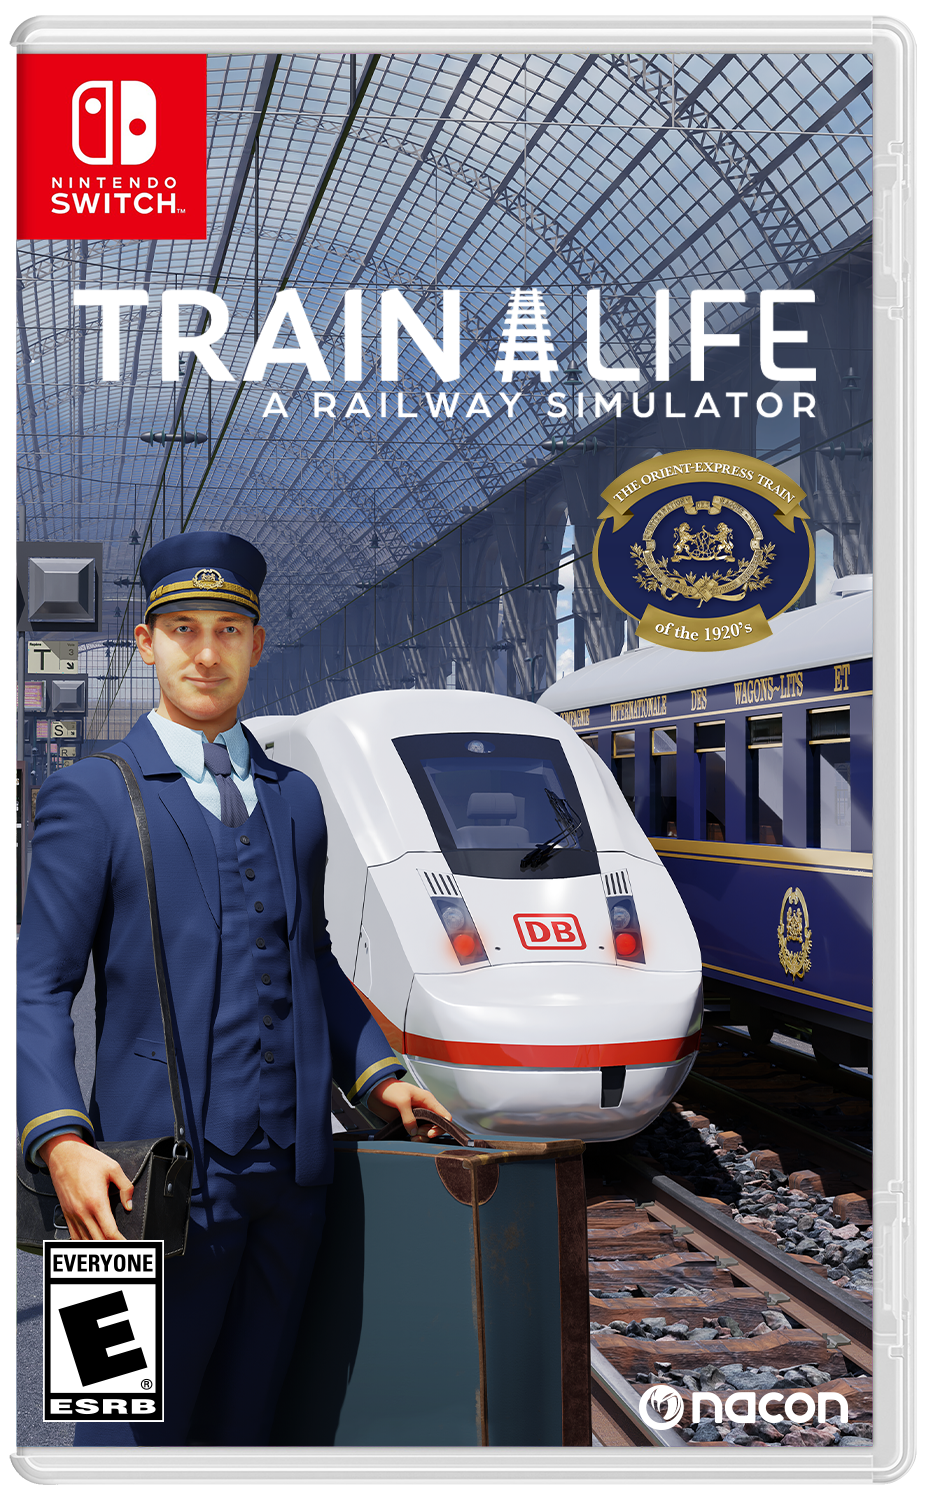 TRAIN GAMES 🚂 - Play Online Games!